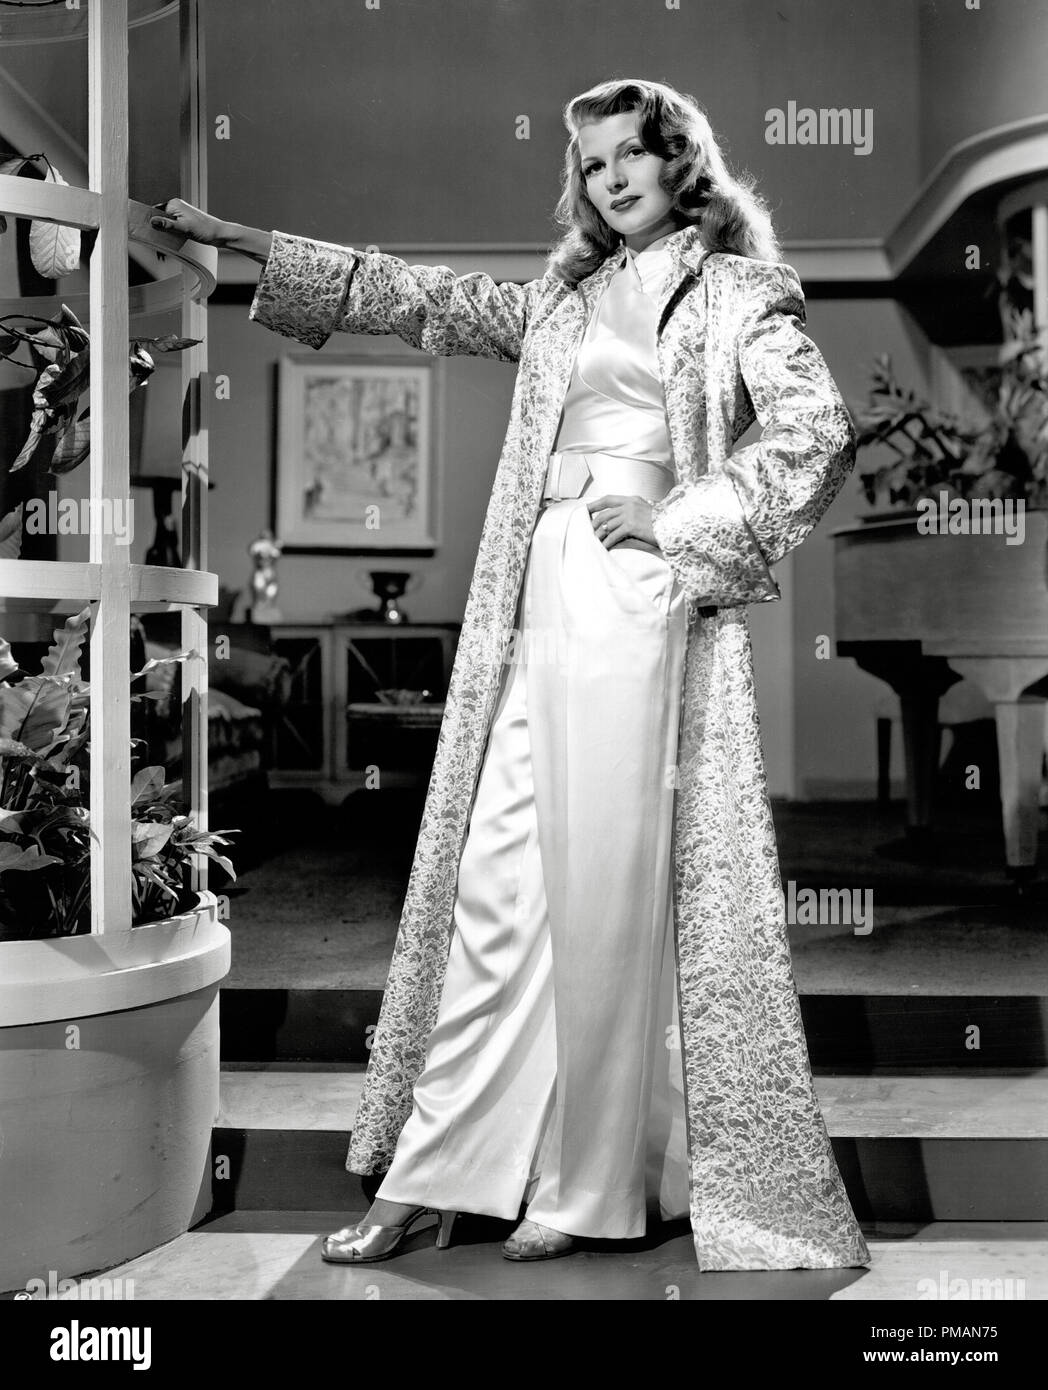 Film Still/Publicity Still of 'Gilda' Rita Hayworth 1946 Columbia / Cinema Publishers Collection - No Release - For Editorial Use Only File Reference # 33505 379THA Stock Photo